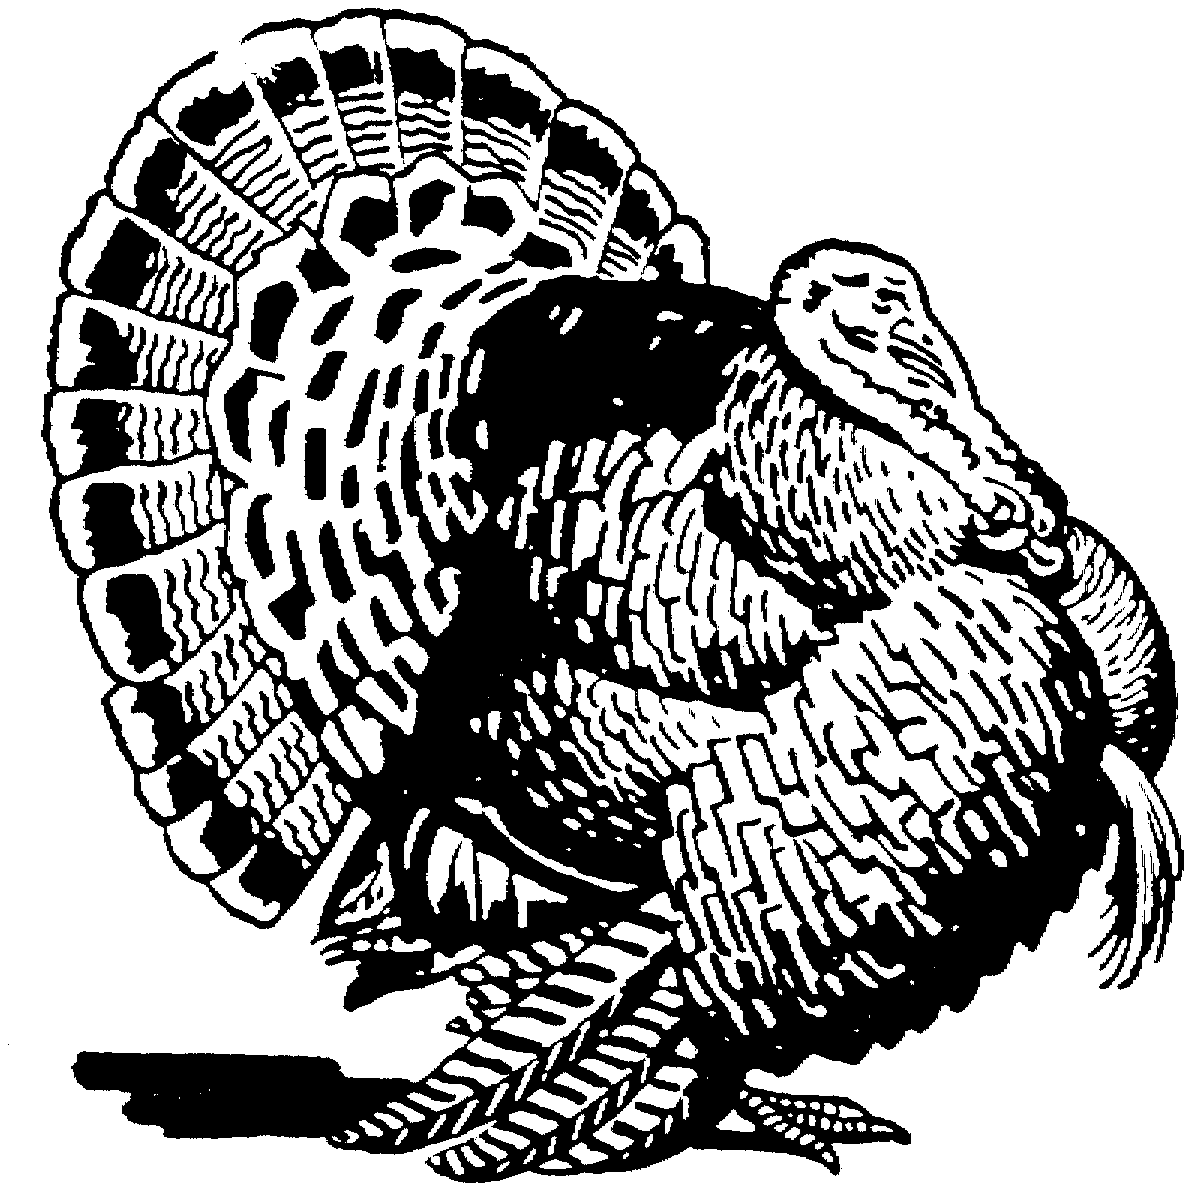 free tom the turkey coloring pages